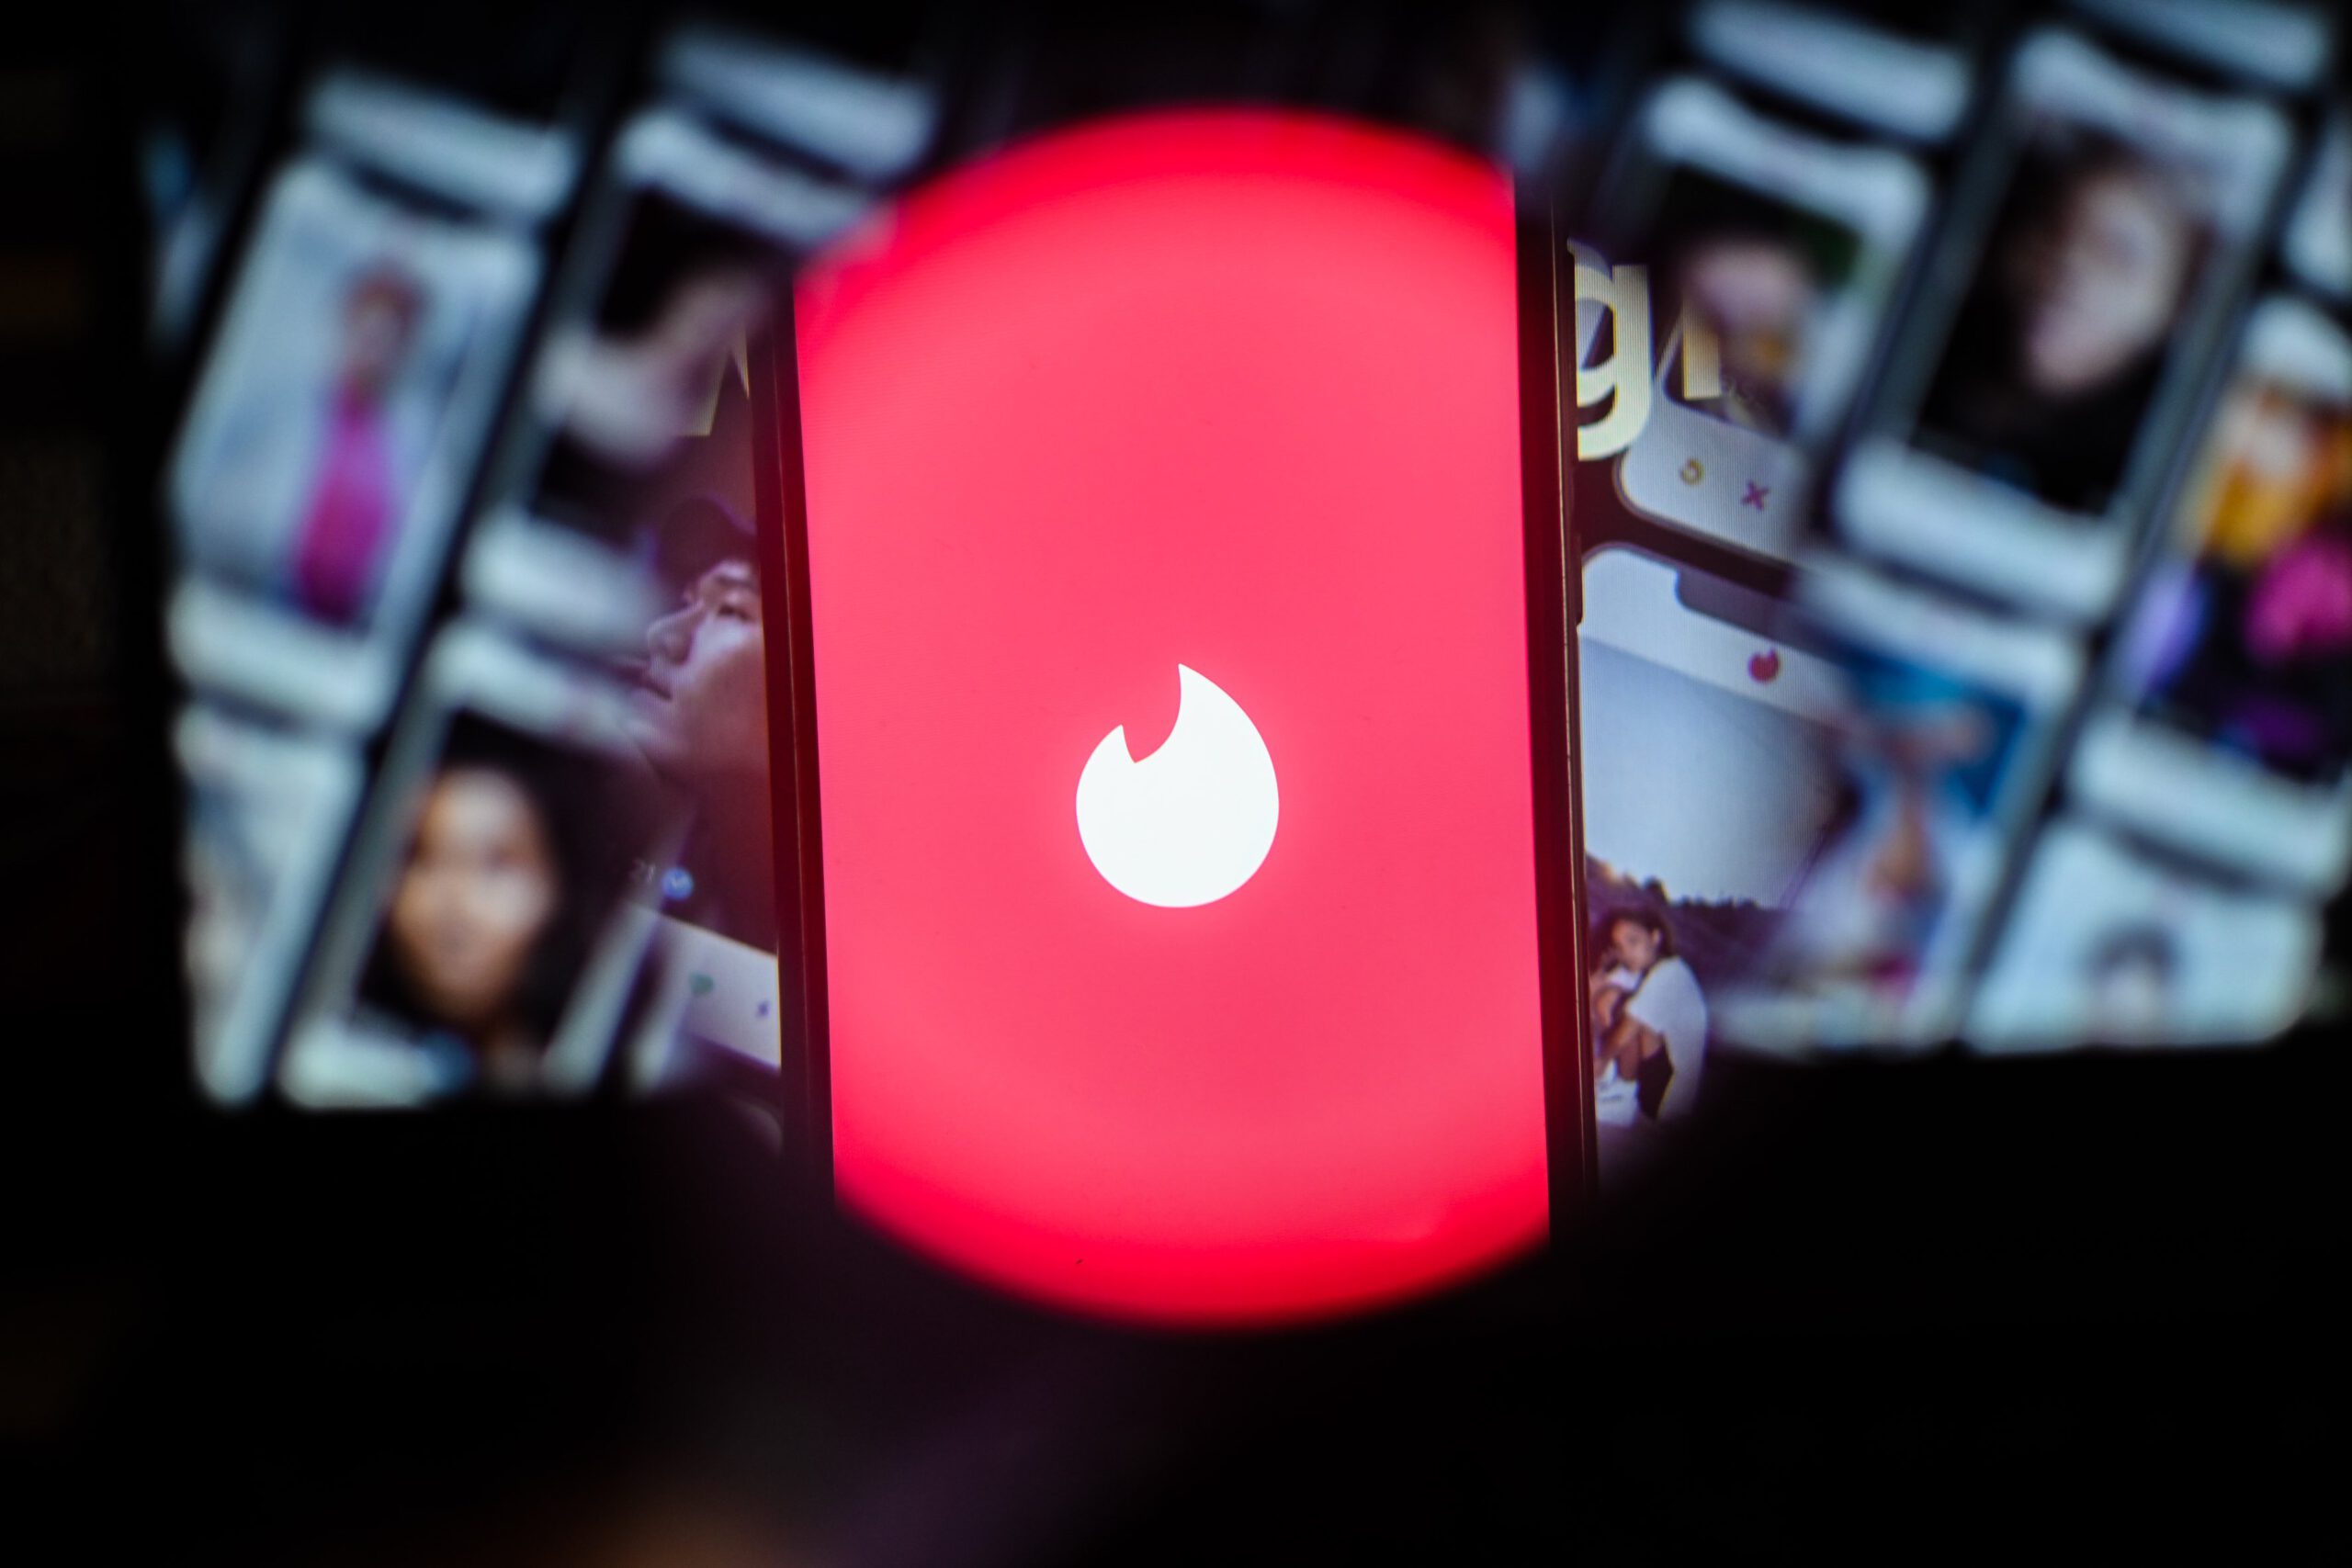 A photo illustration of the dating app Tinder on iPhone screen